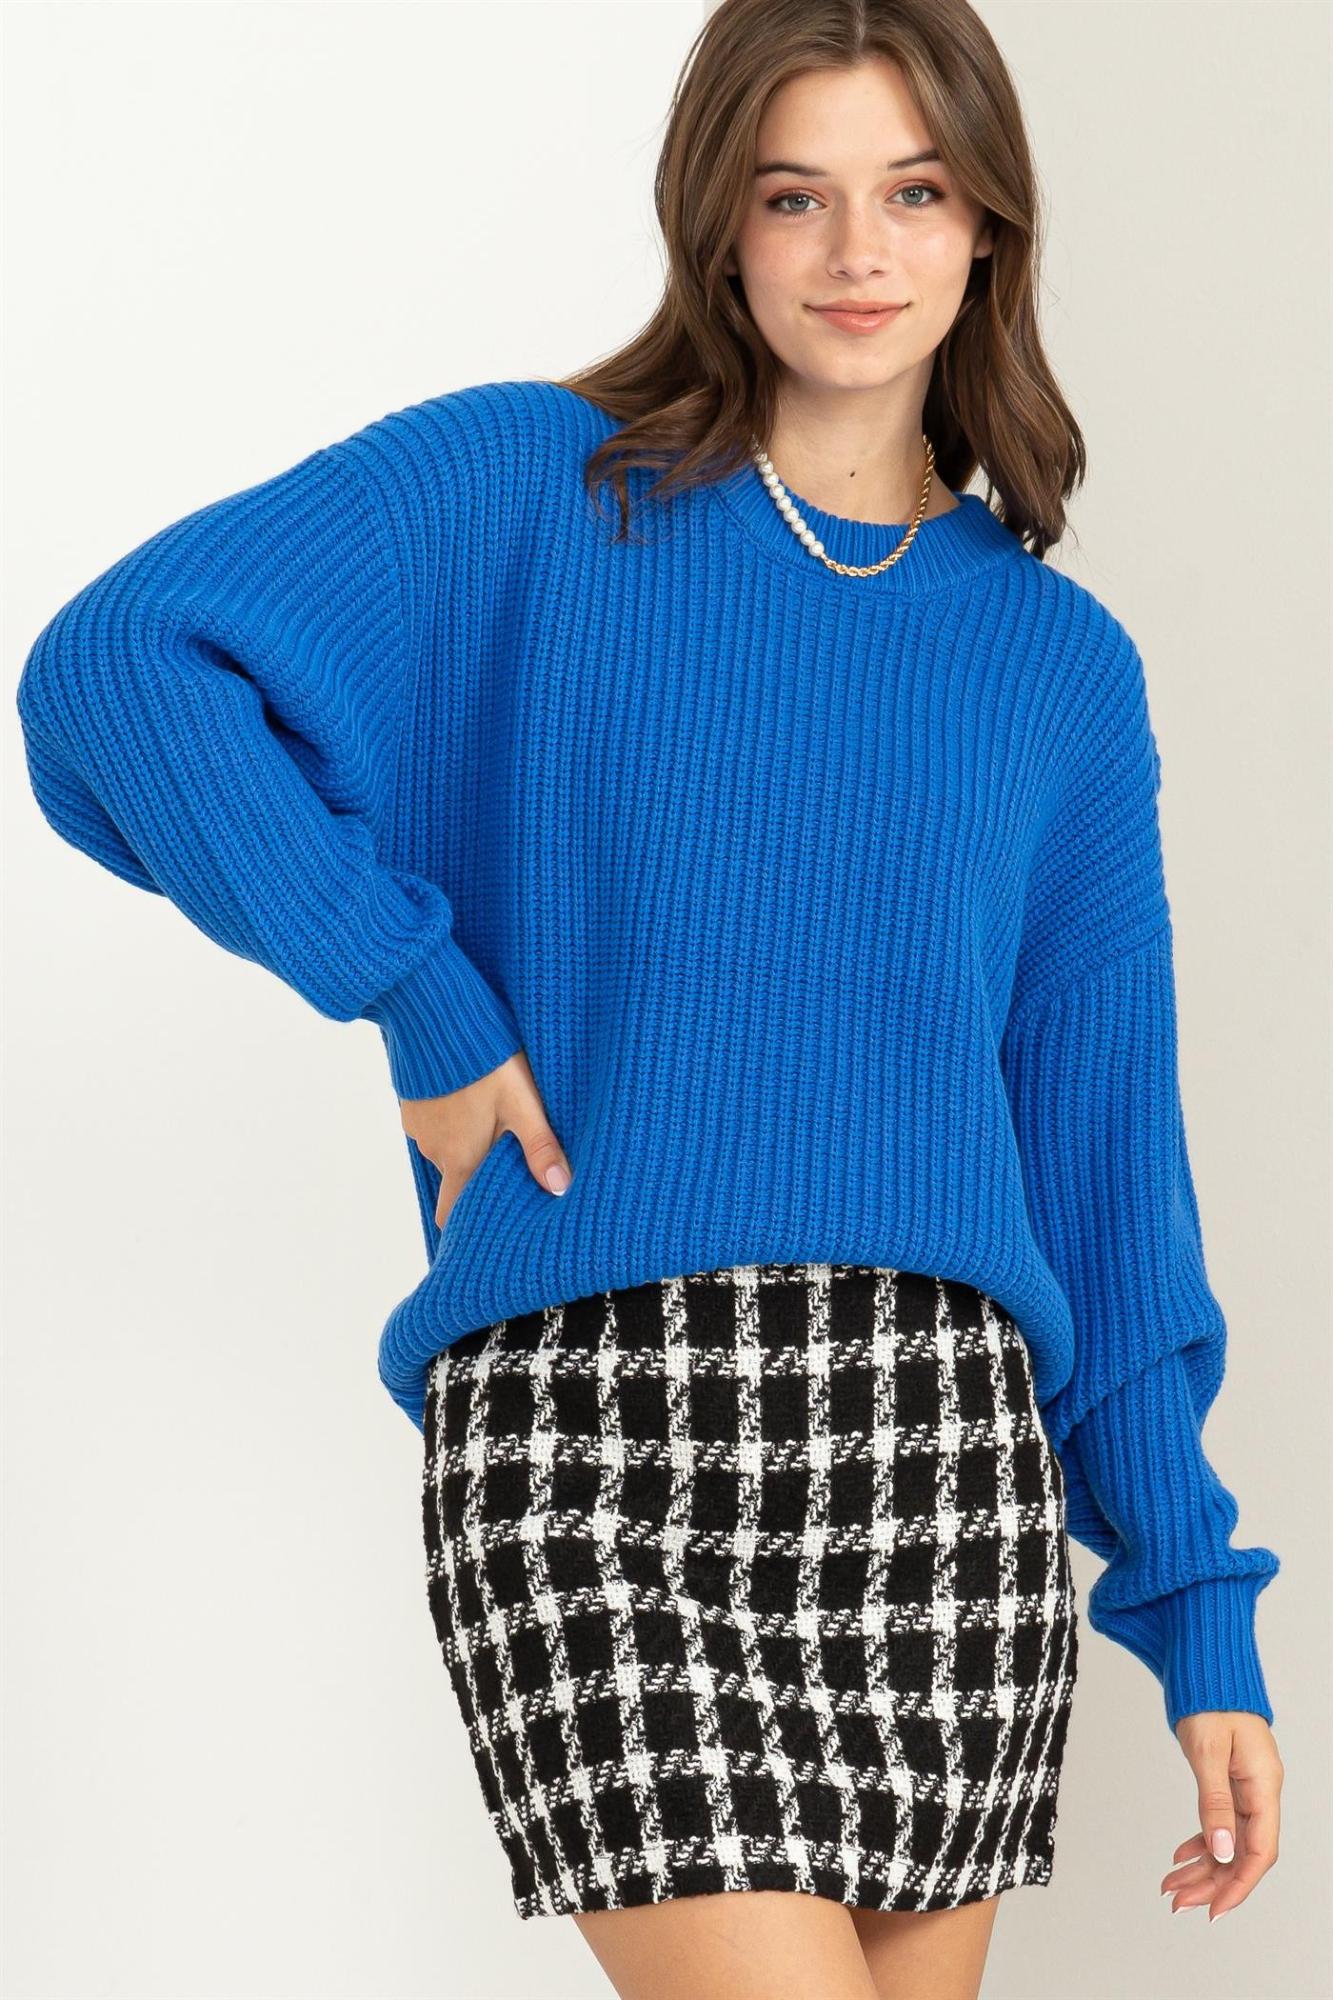 Long Day Knit Sweater